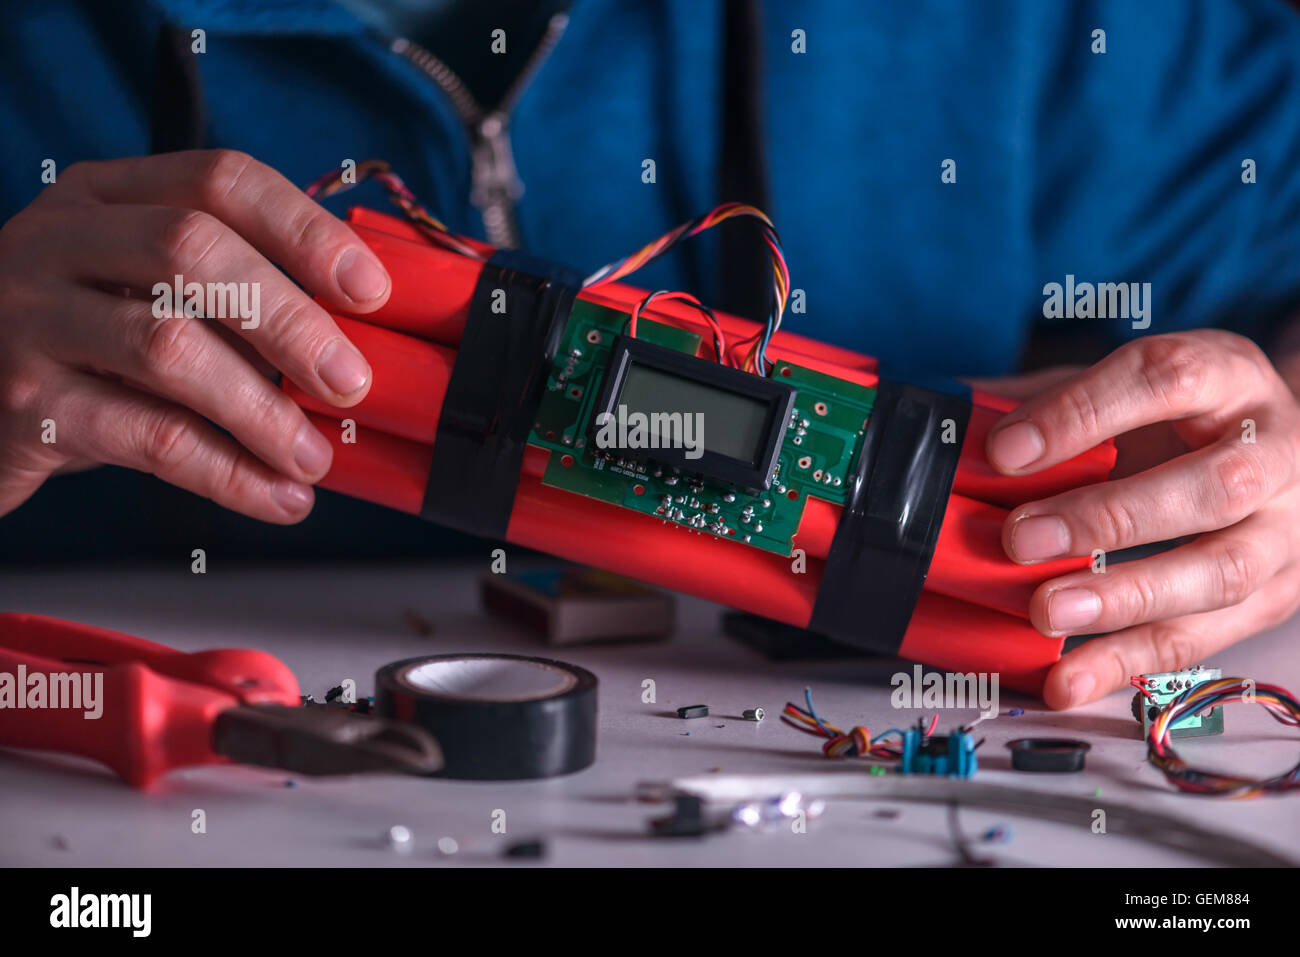 making bomb with digital timer Stock Photo